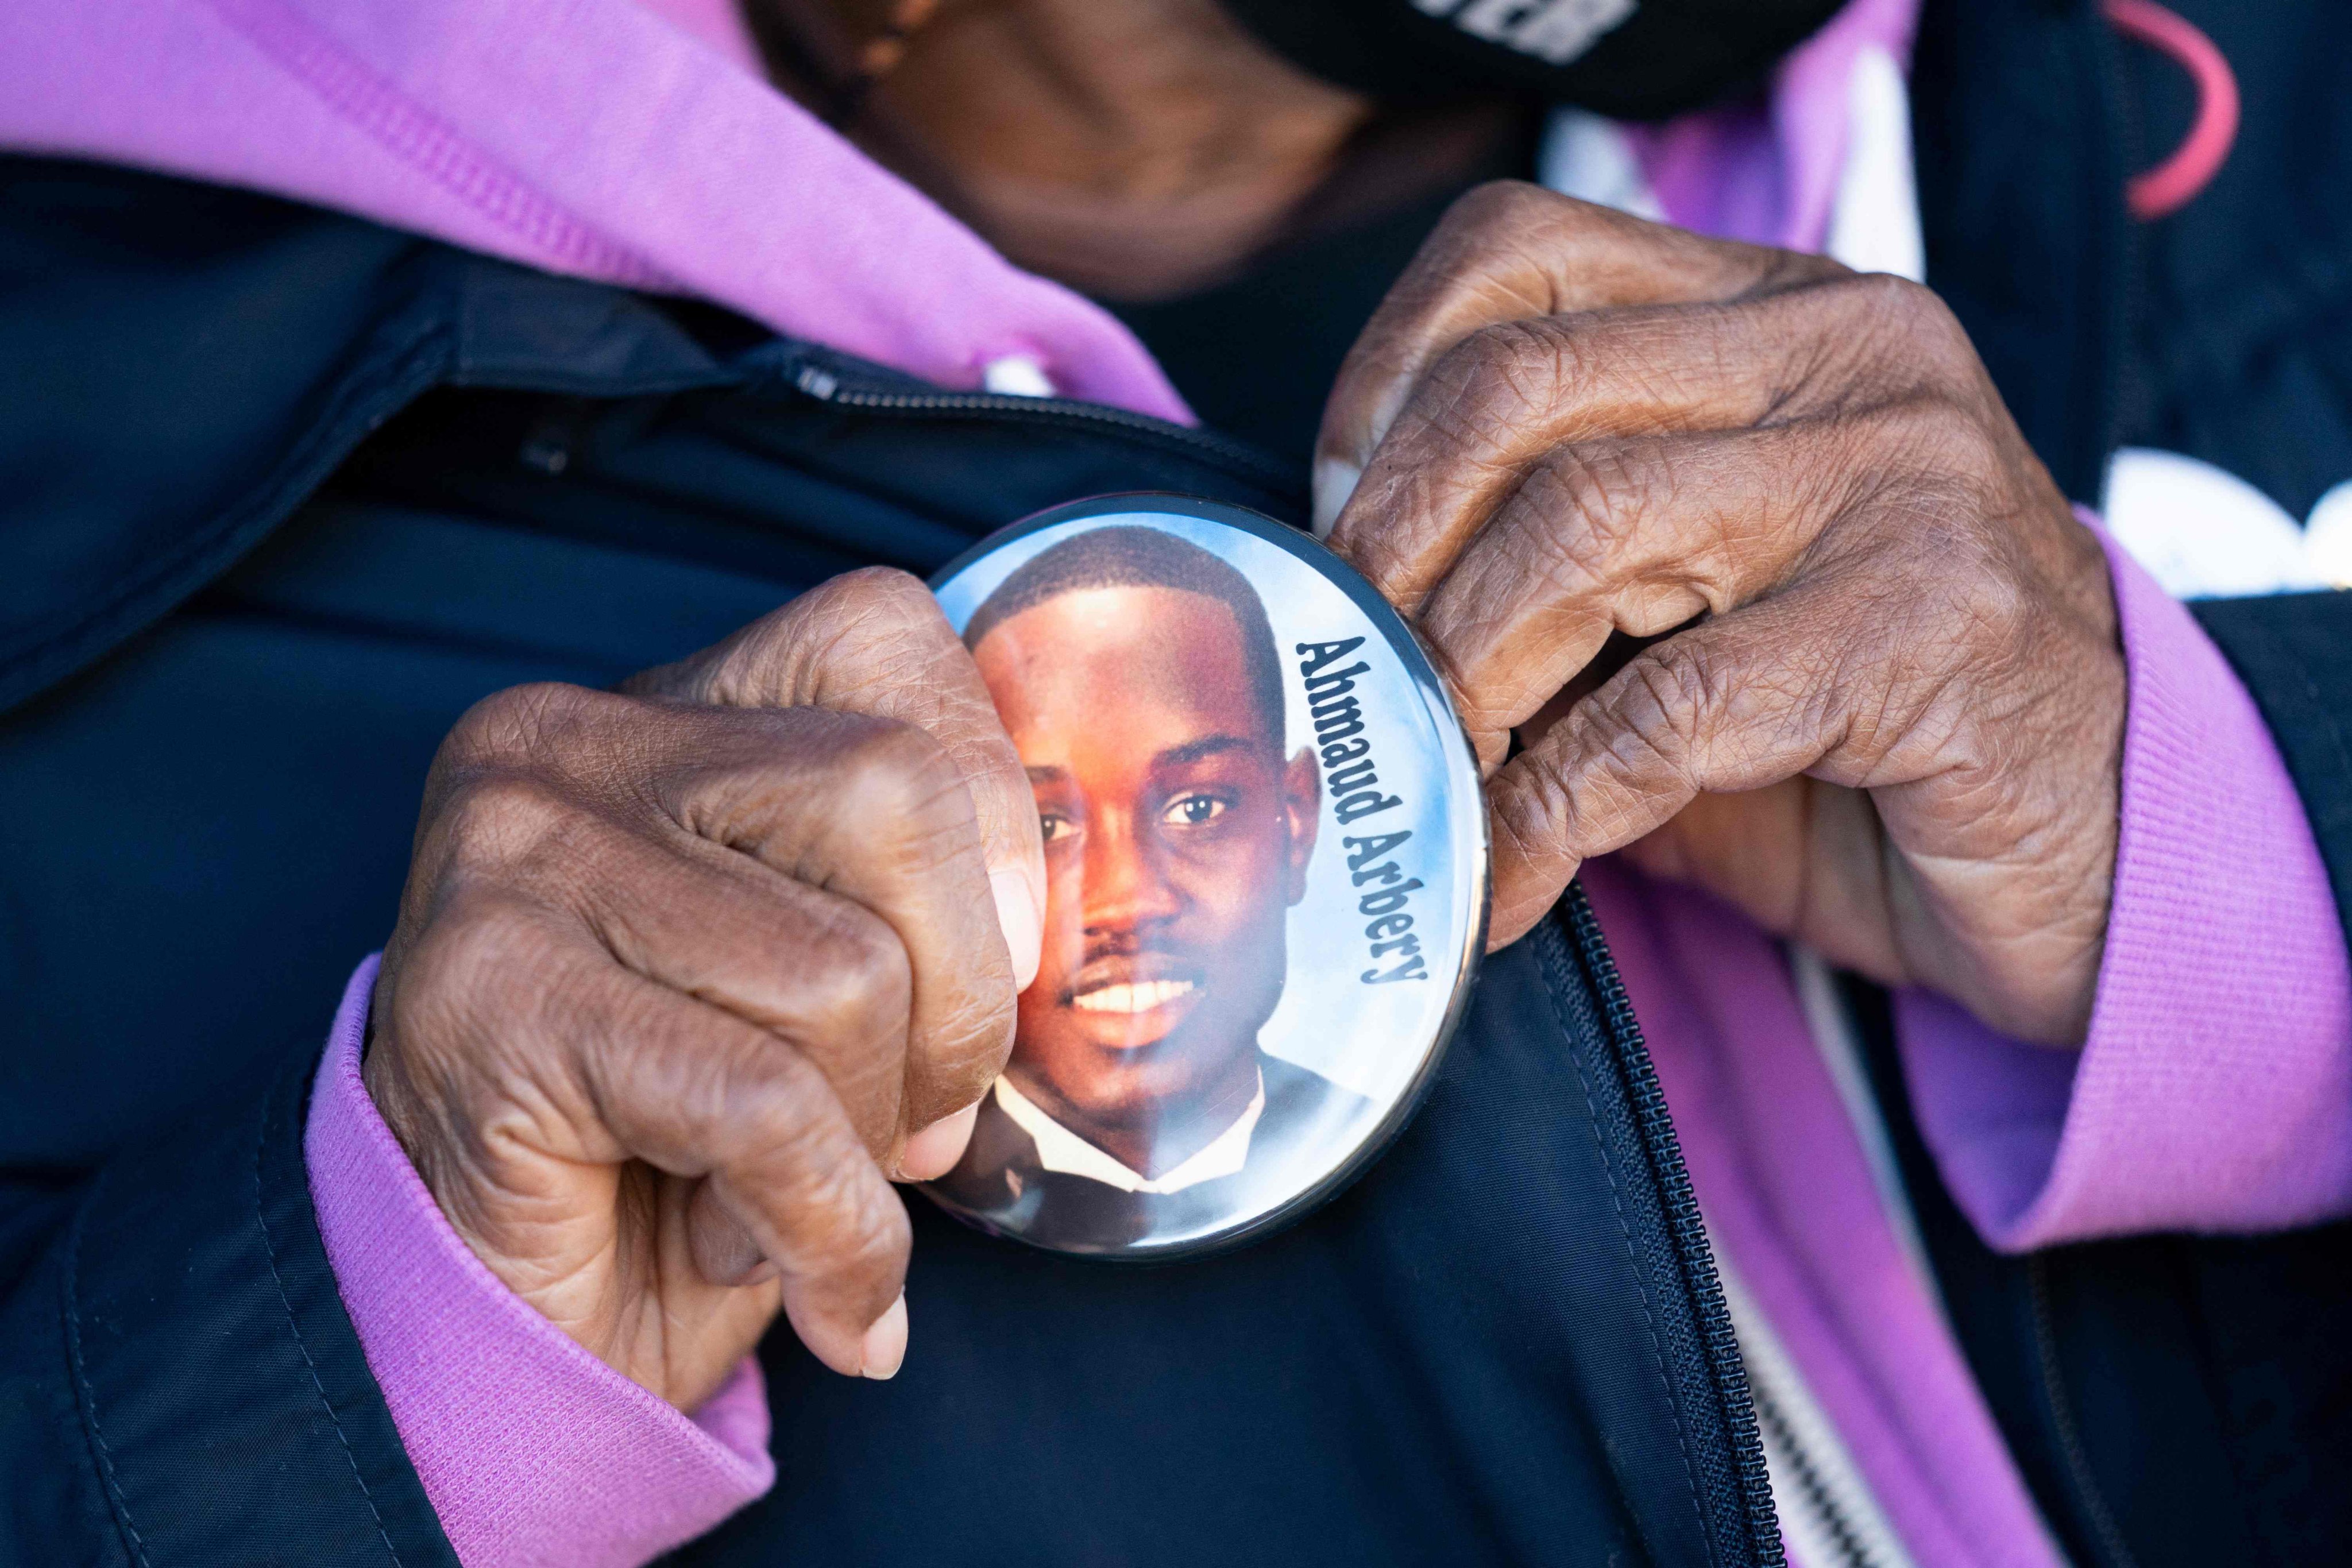 A woman puts on a button for Ahmaud Arbery outside the Glynn County Courthouse in Georgia in November. Photo: AFP